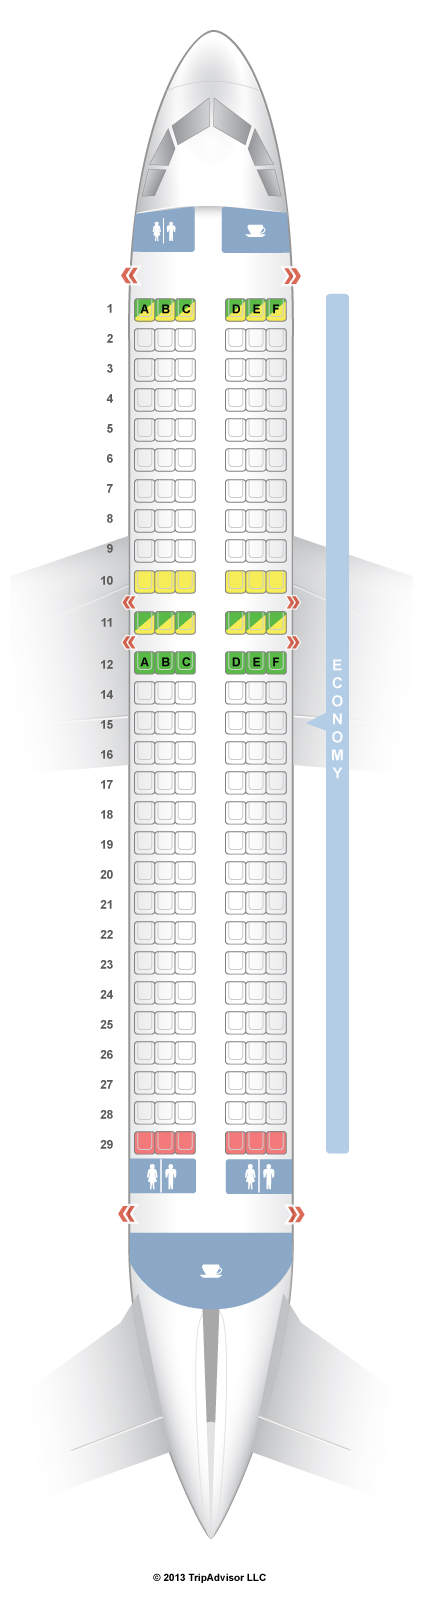 Airbus A320neo Seating Chart